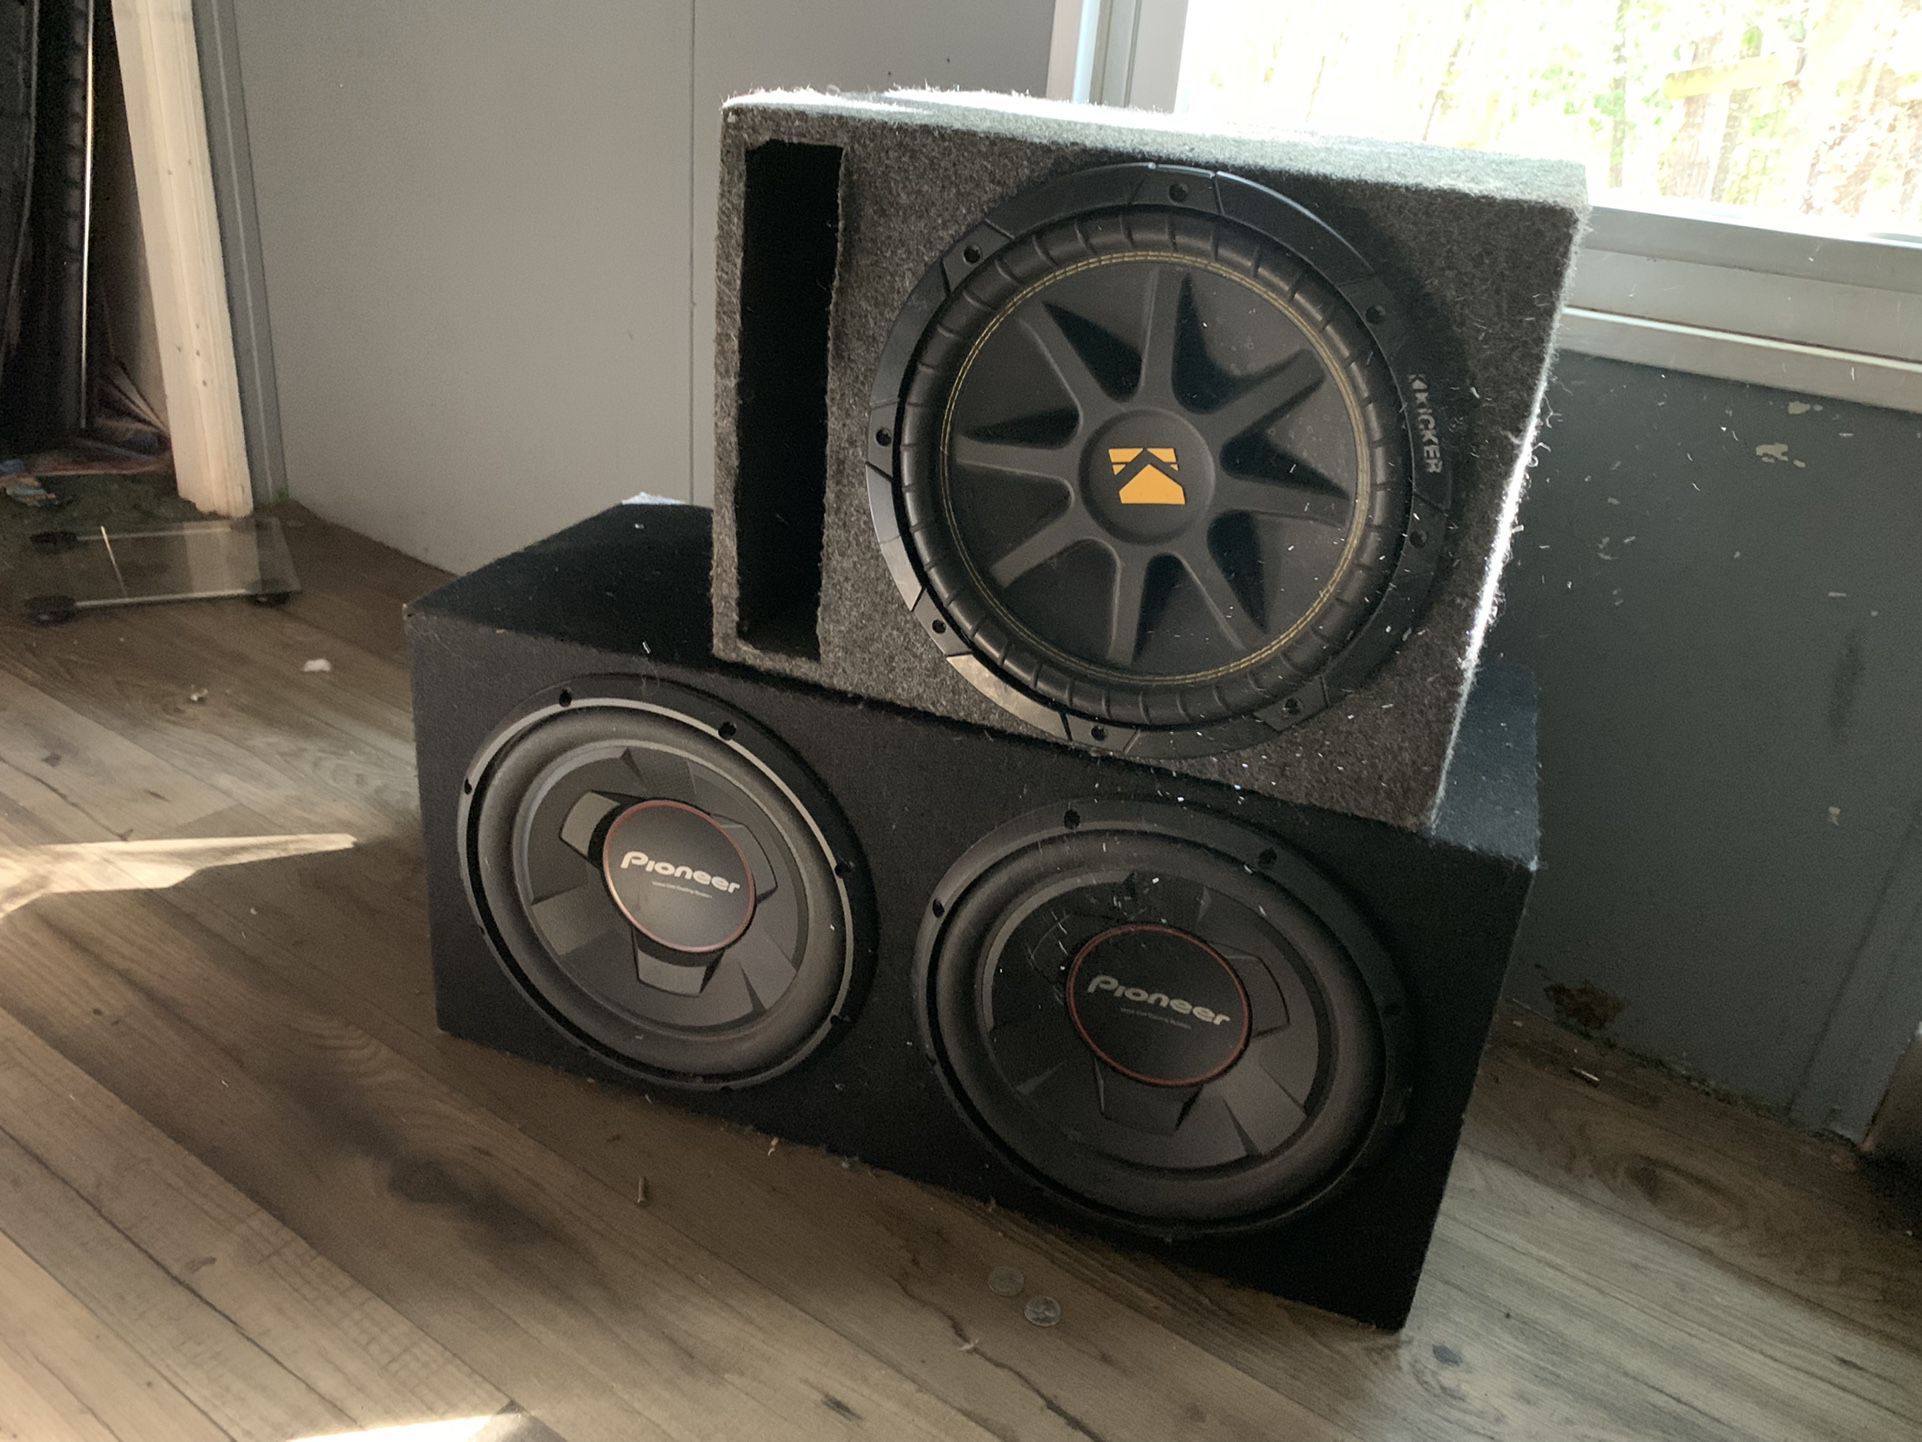 3 12 inch subwoofers